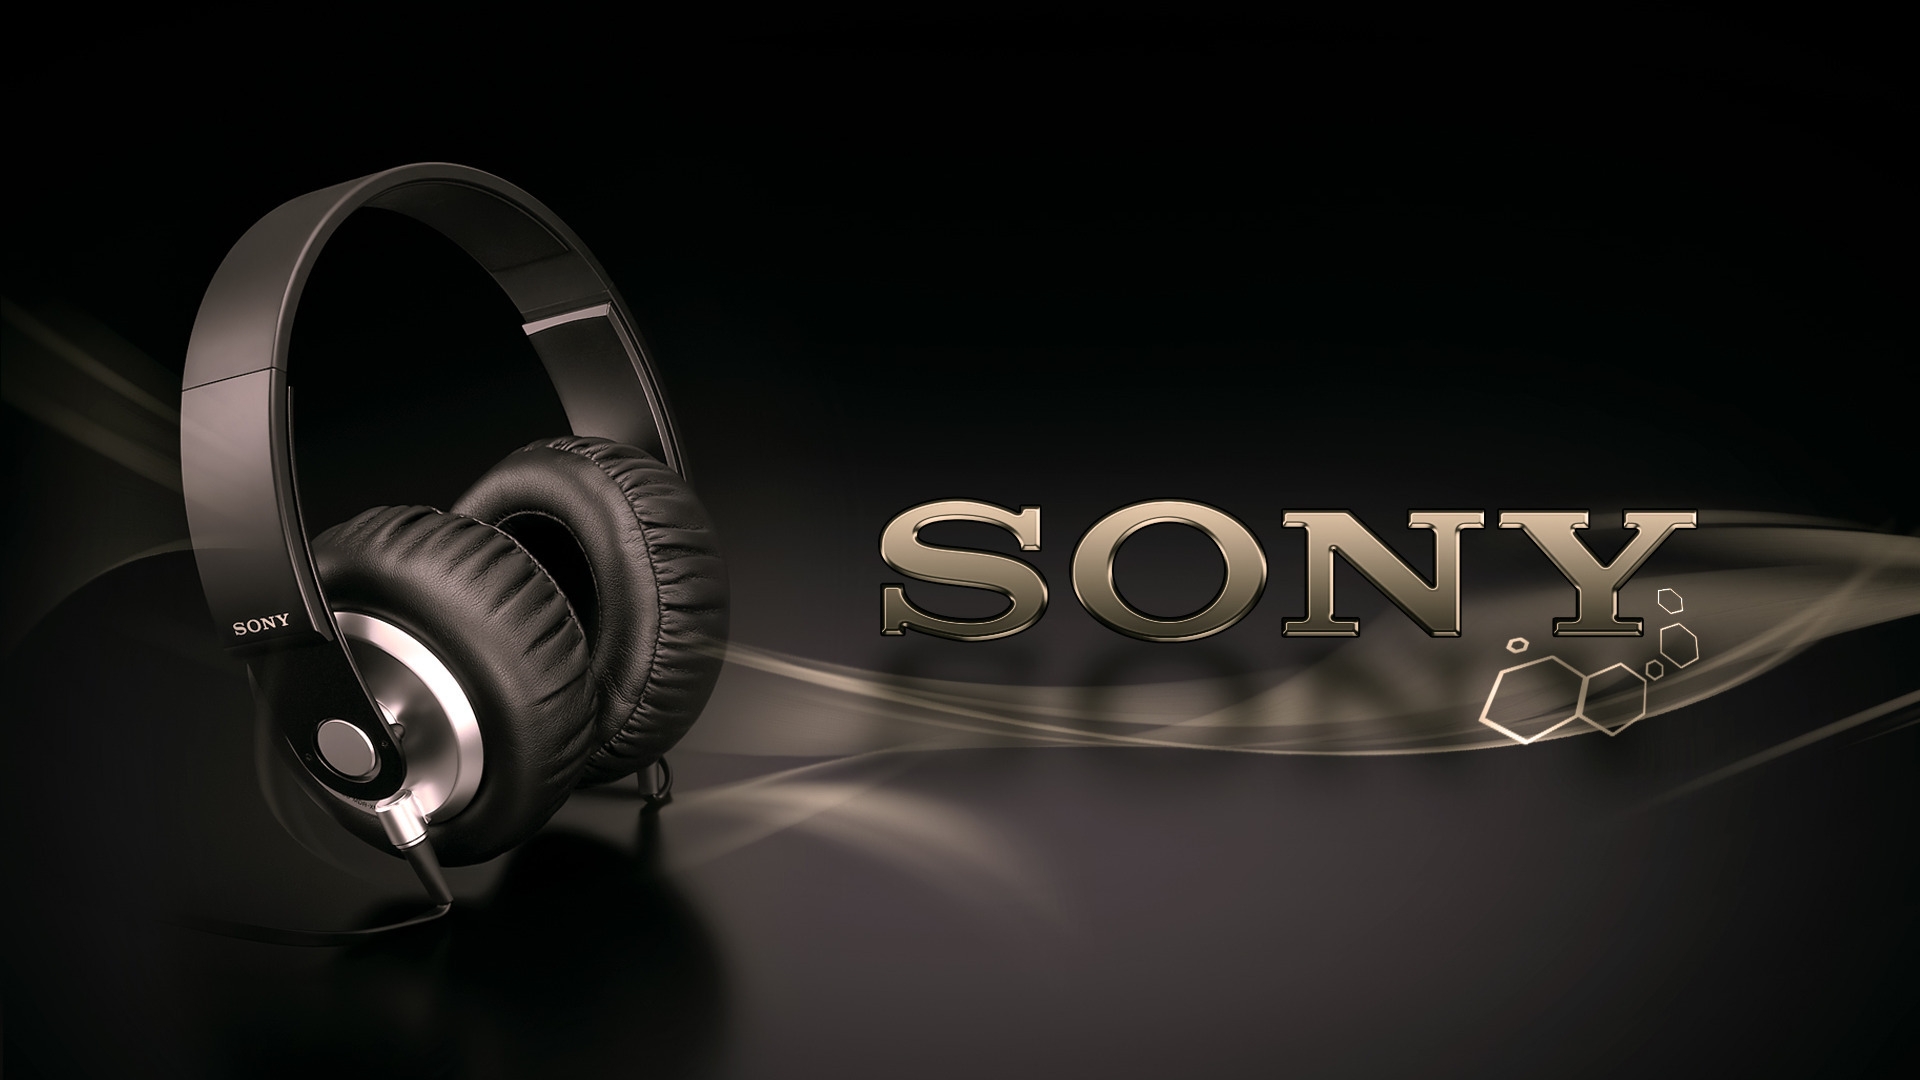 Cool Sony Headphones for 1920 x 1080 HDTV 1080p resolution